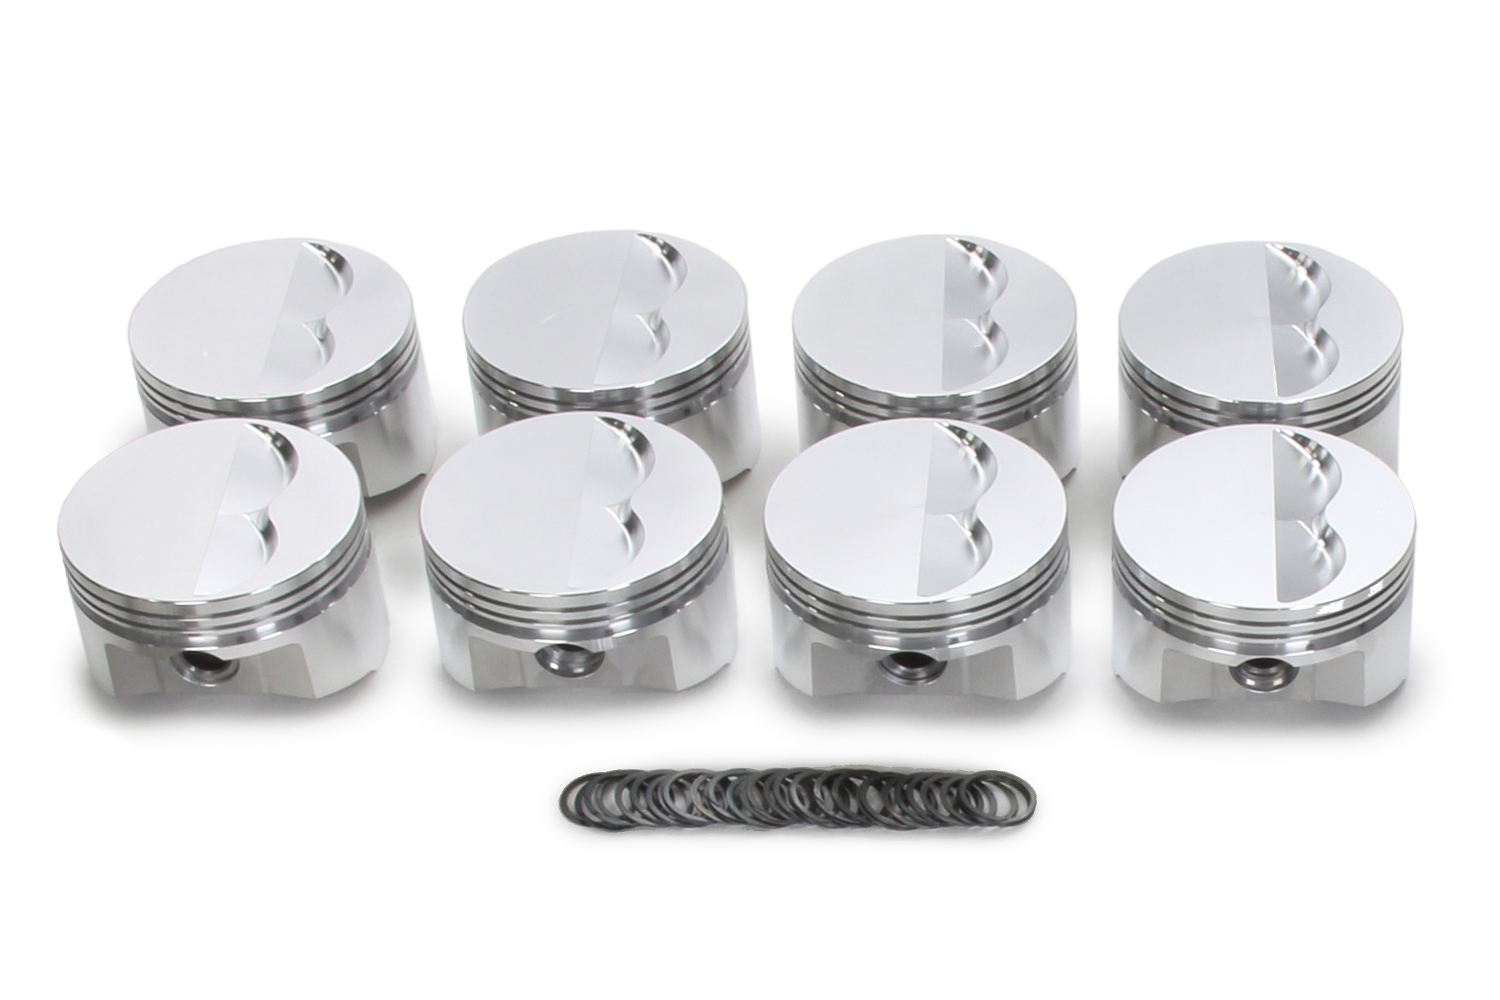 SRP Pistons 138093 Piston, 350 Flat Top, Forged, 4.030 in Bore, 1/16 x 1/16 x 3/16 in Ring Grooves, Minus 5.00 cc, Small Block Chevy, Set of 8